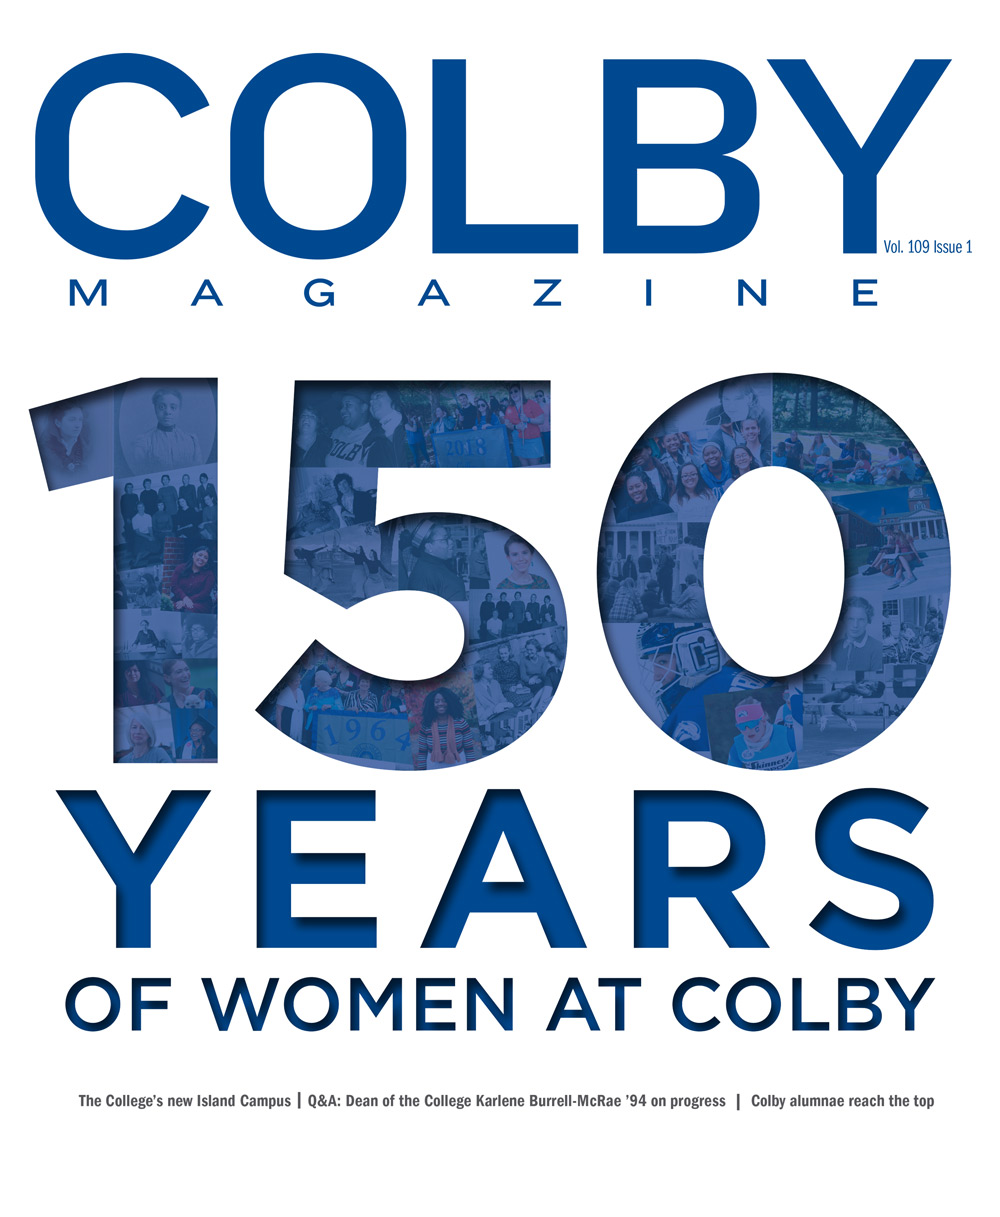 Colby Magazine Vol. 109 Issue 1 cover